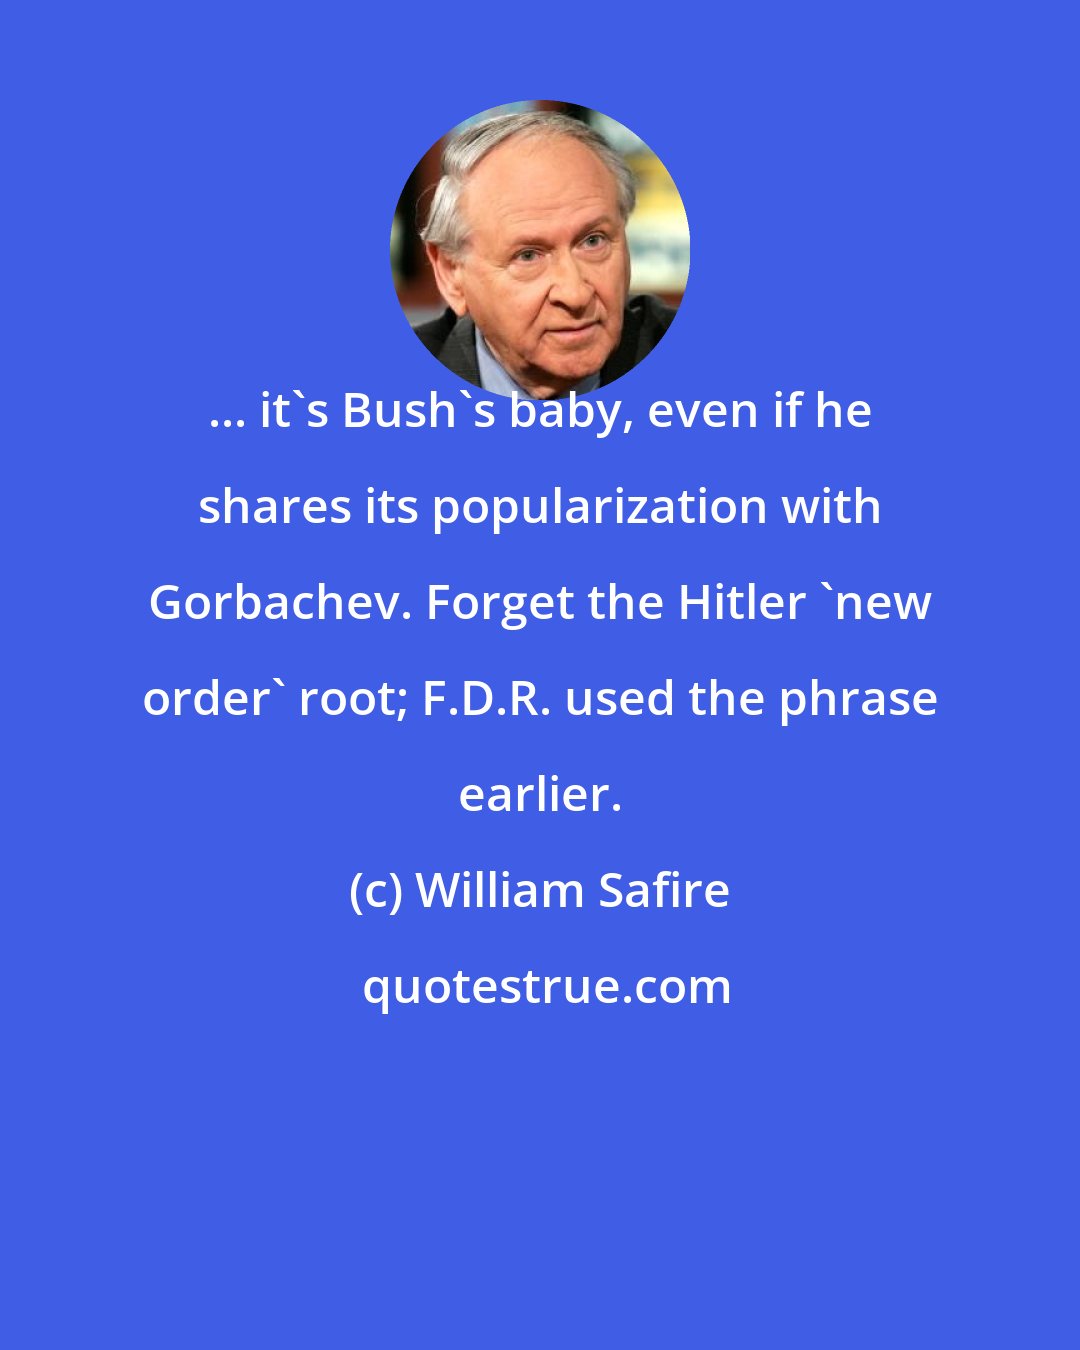 William Safire: ... it's Bush's baby, even if he shares its popularization with Gorbachev. Forget the Hitler 'new order' root; F.D.R. used the phrase earlier.